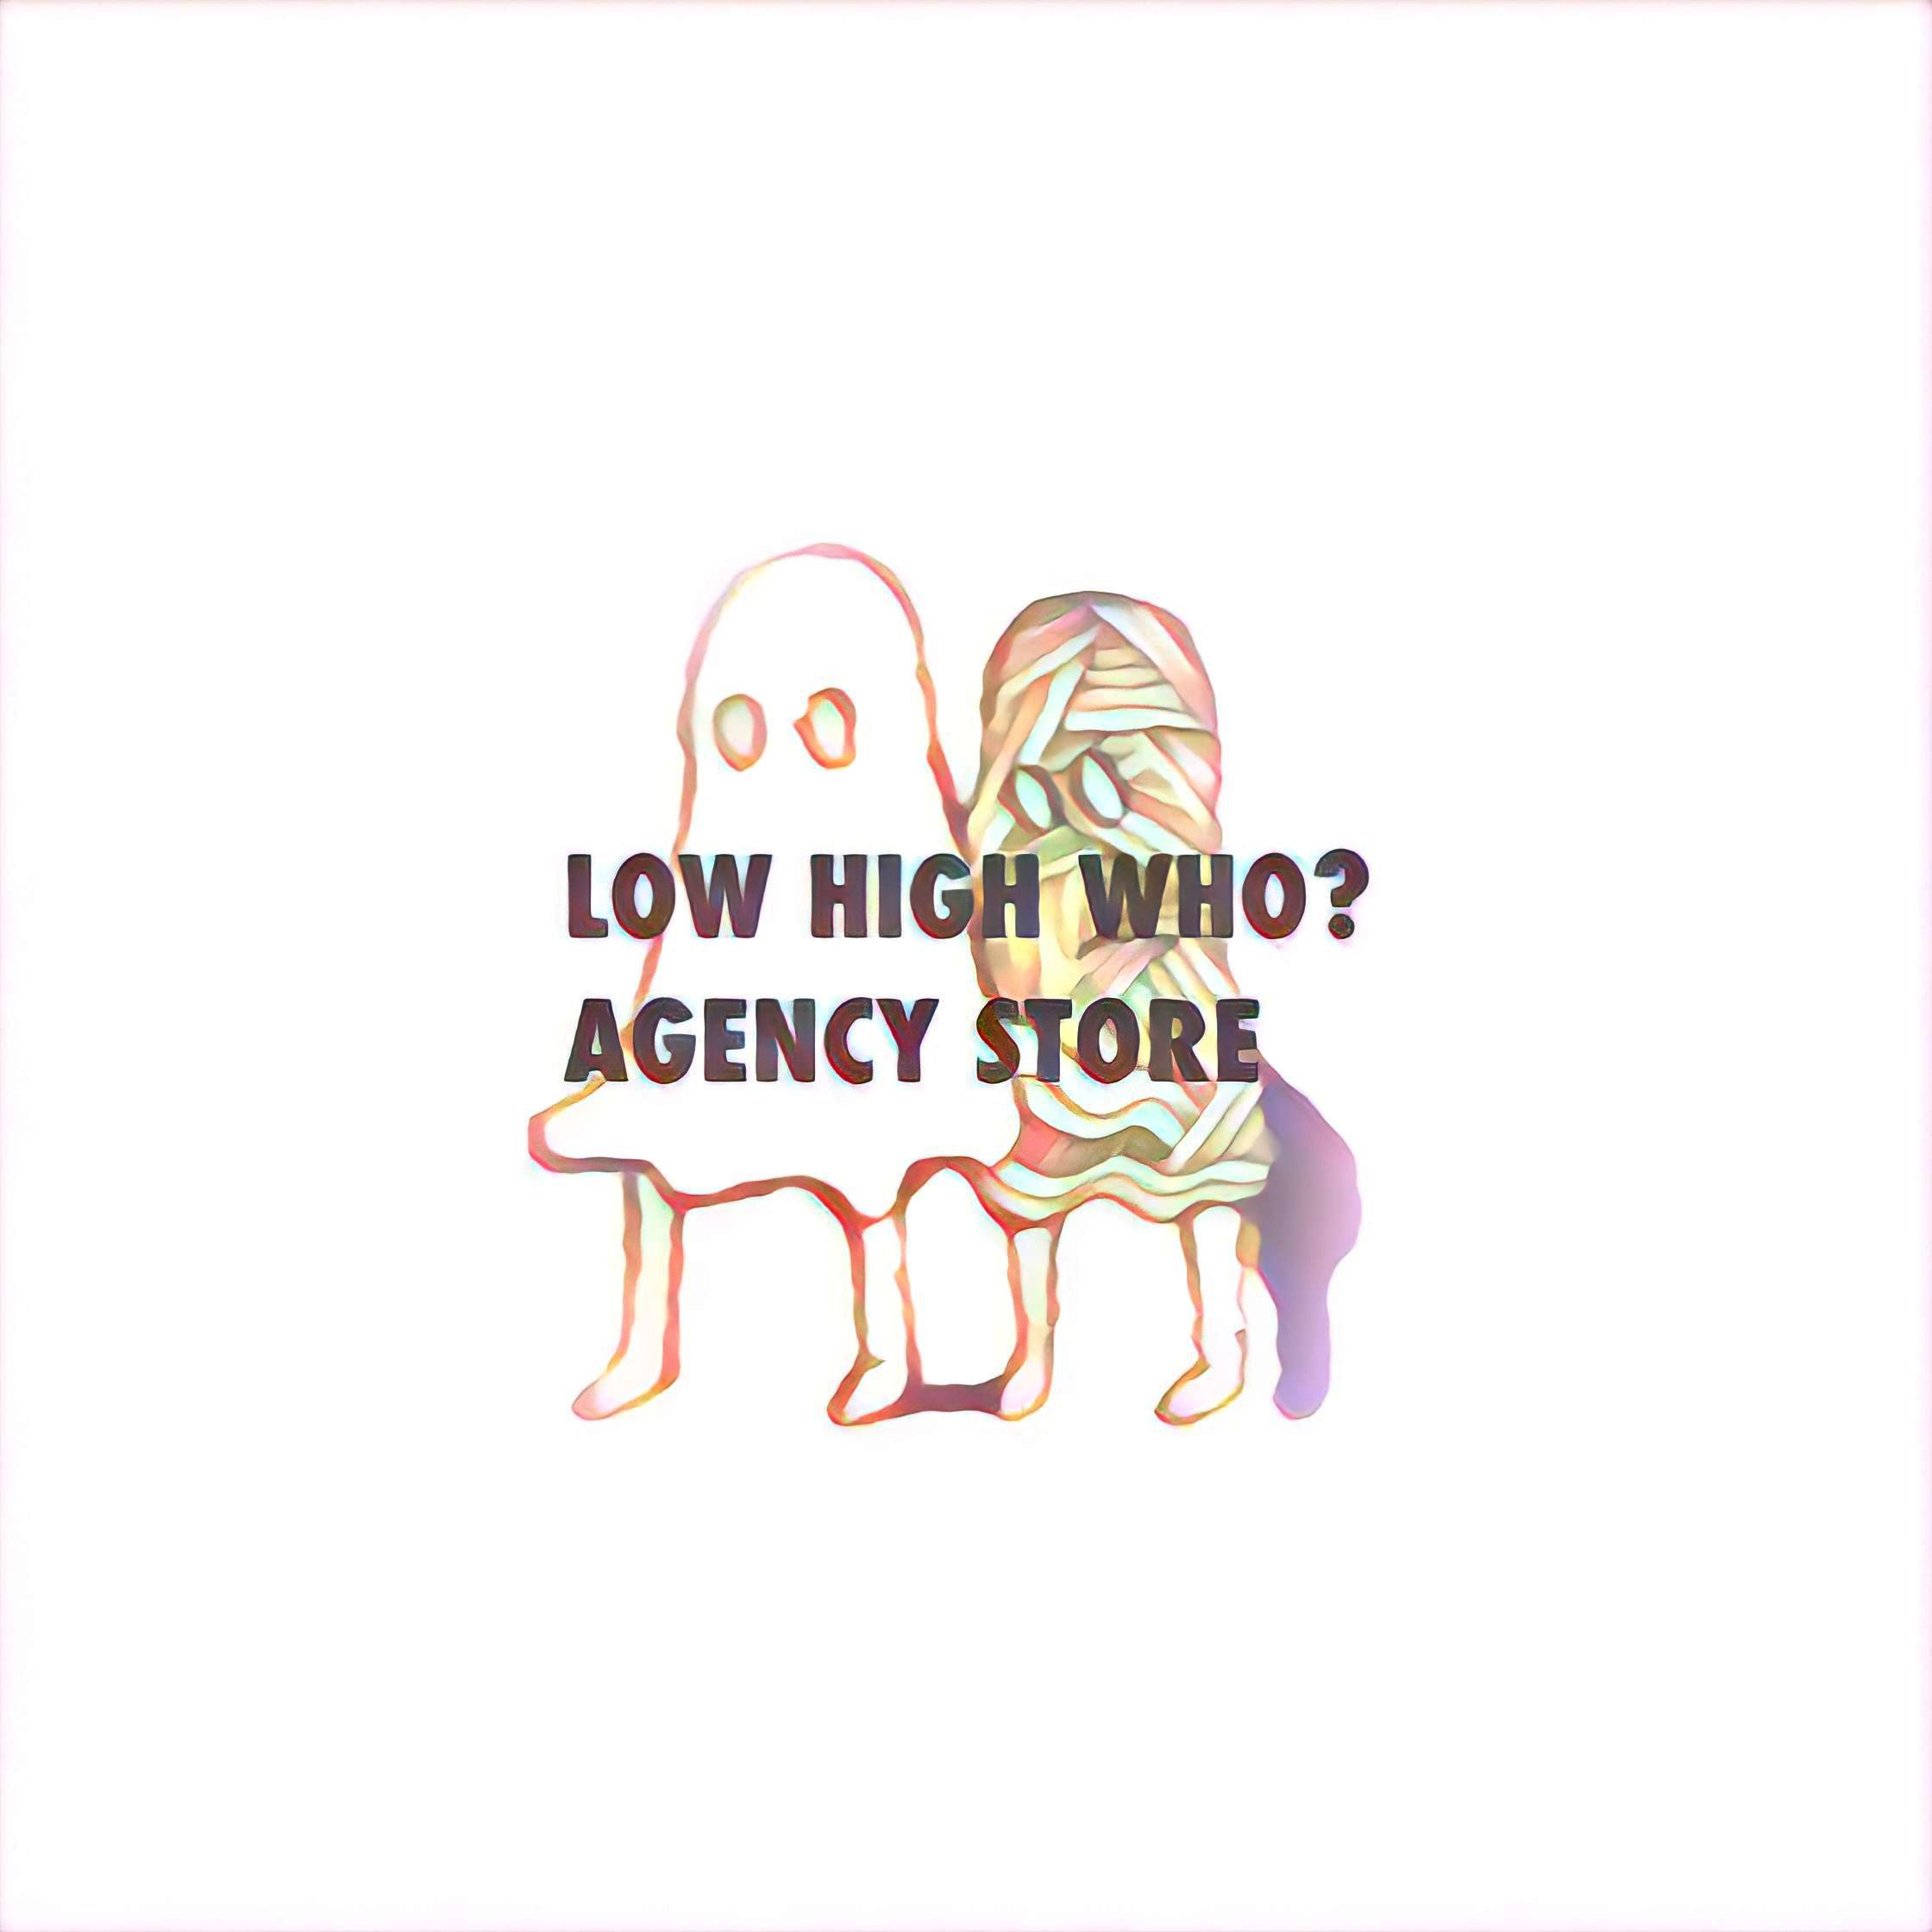 LOW HIGH WHO? AGENCY STORE